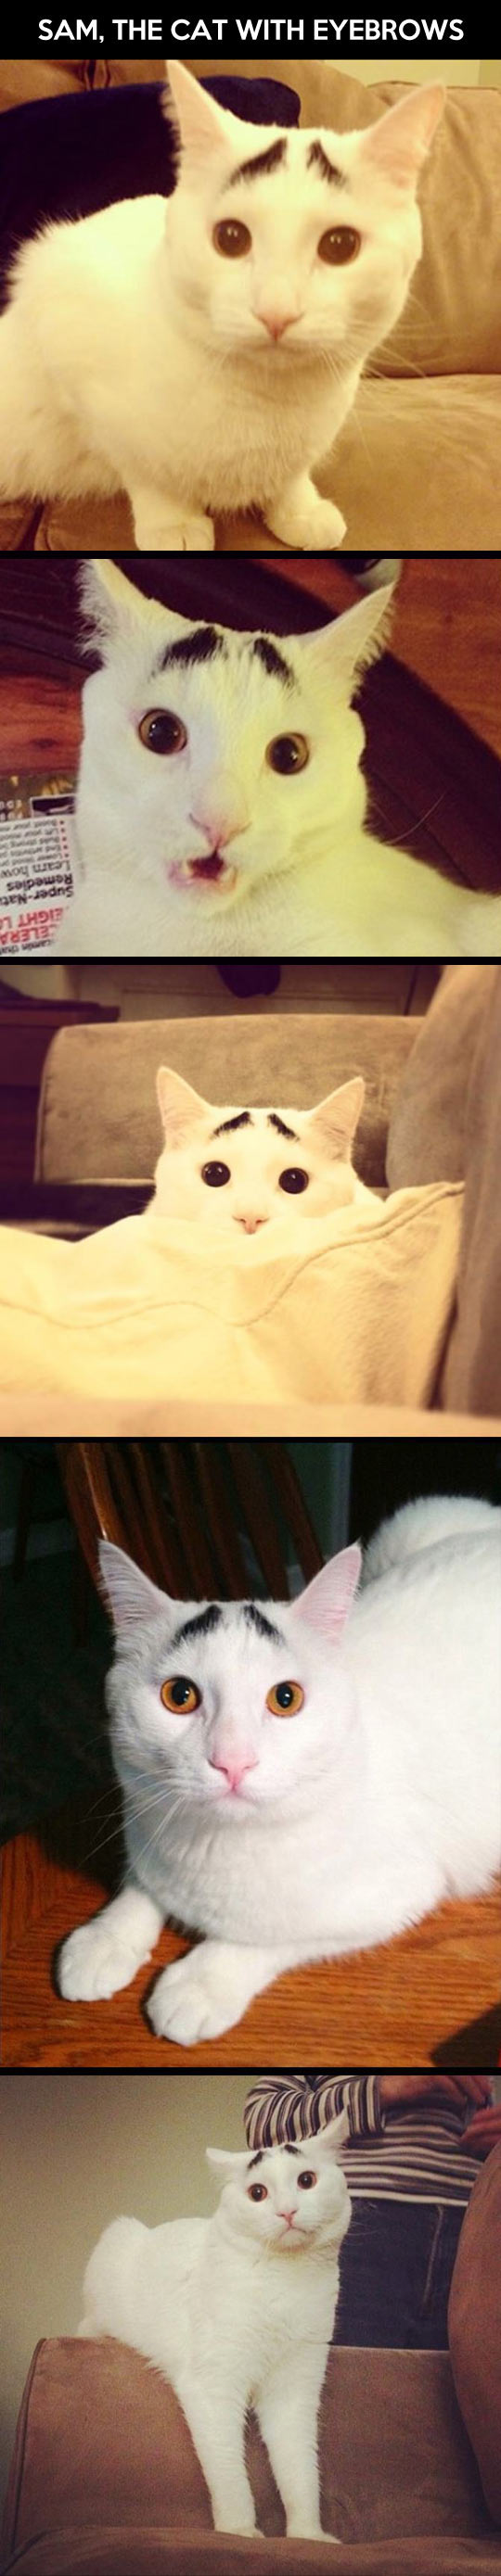 The cat with eyebrows…